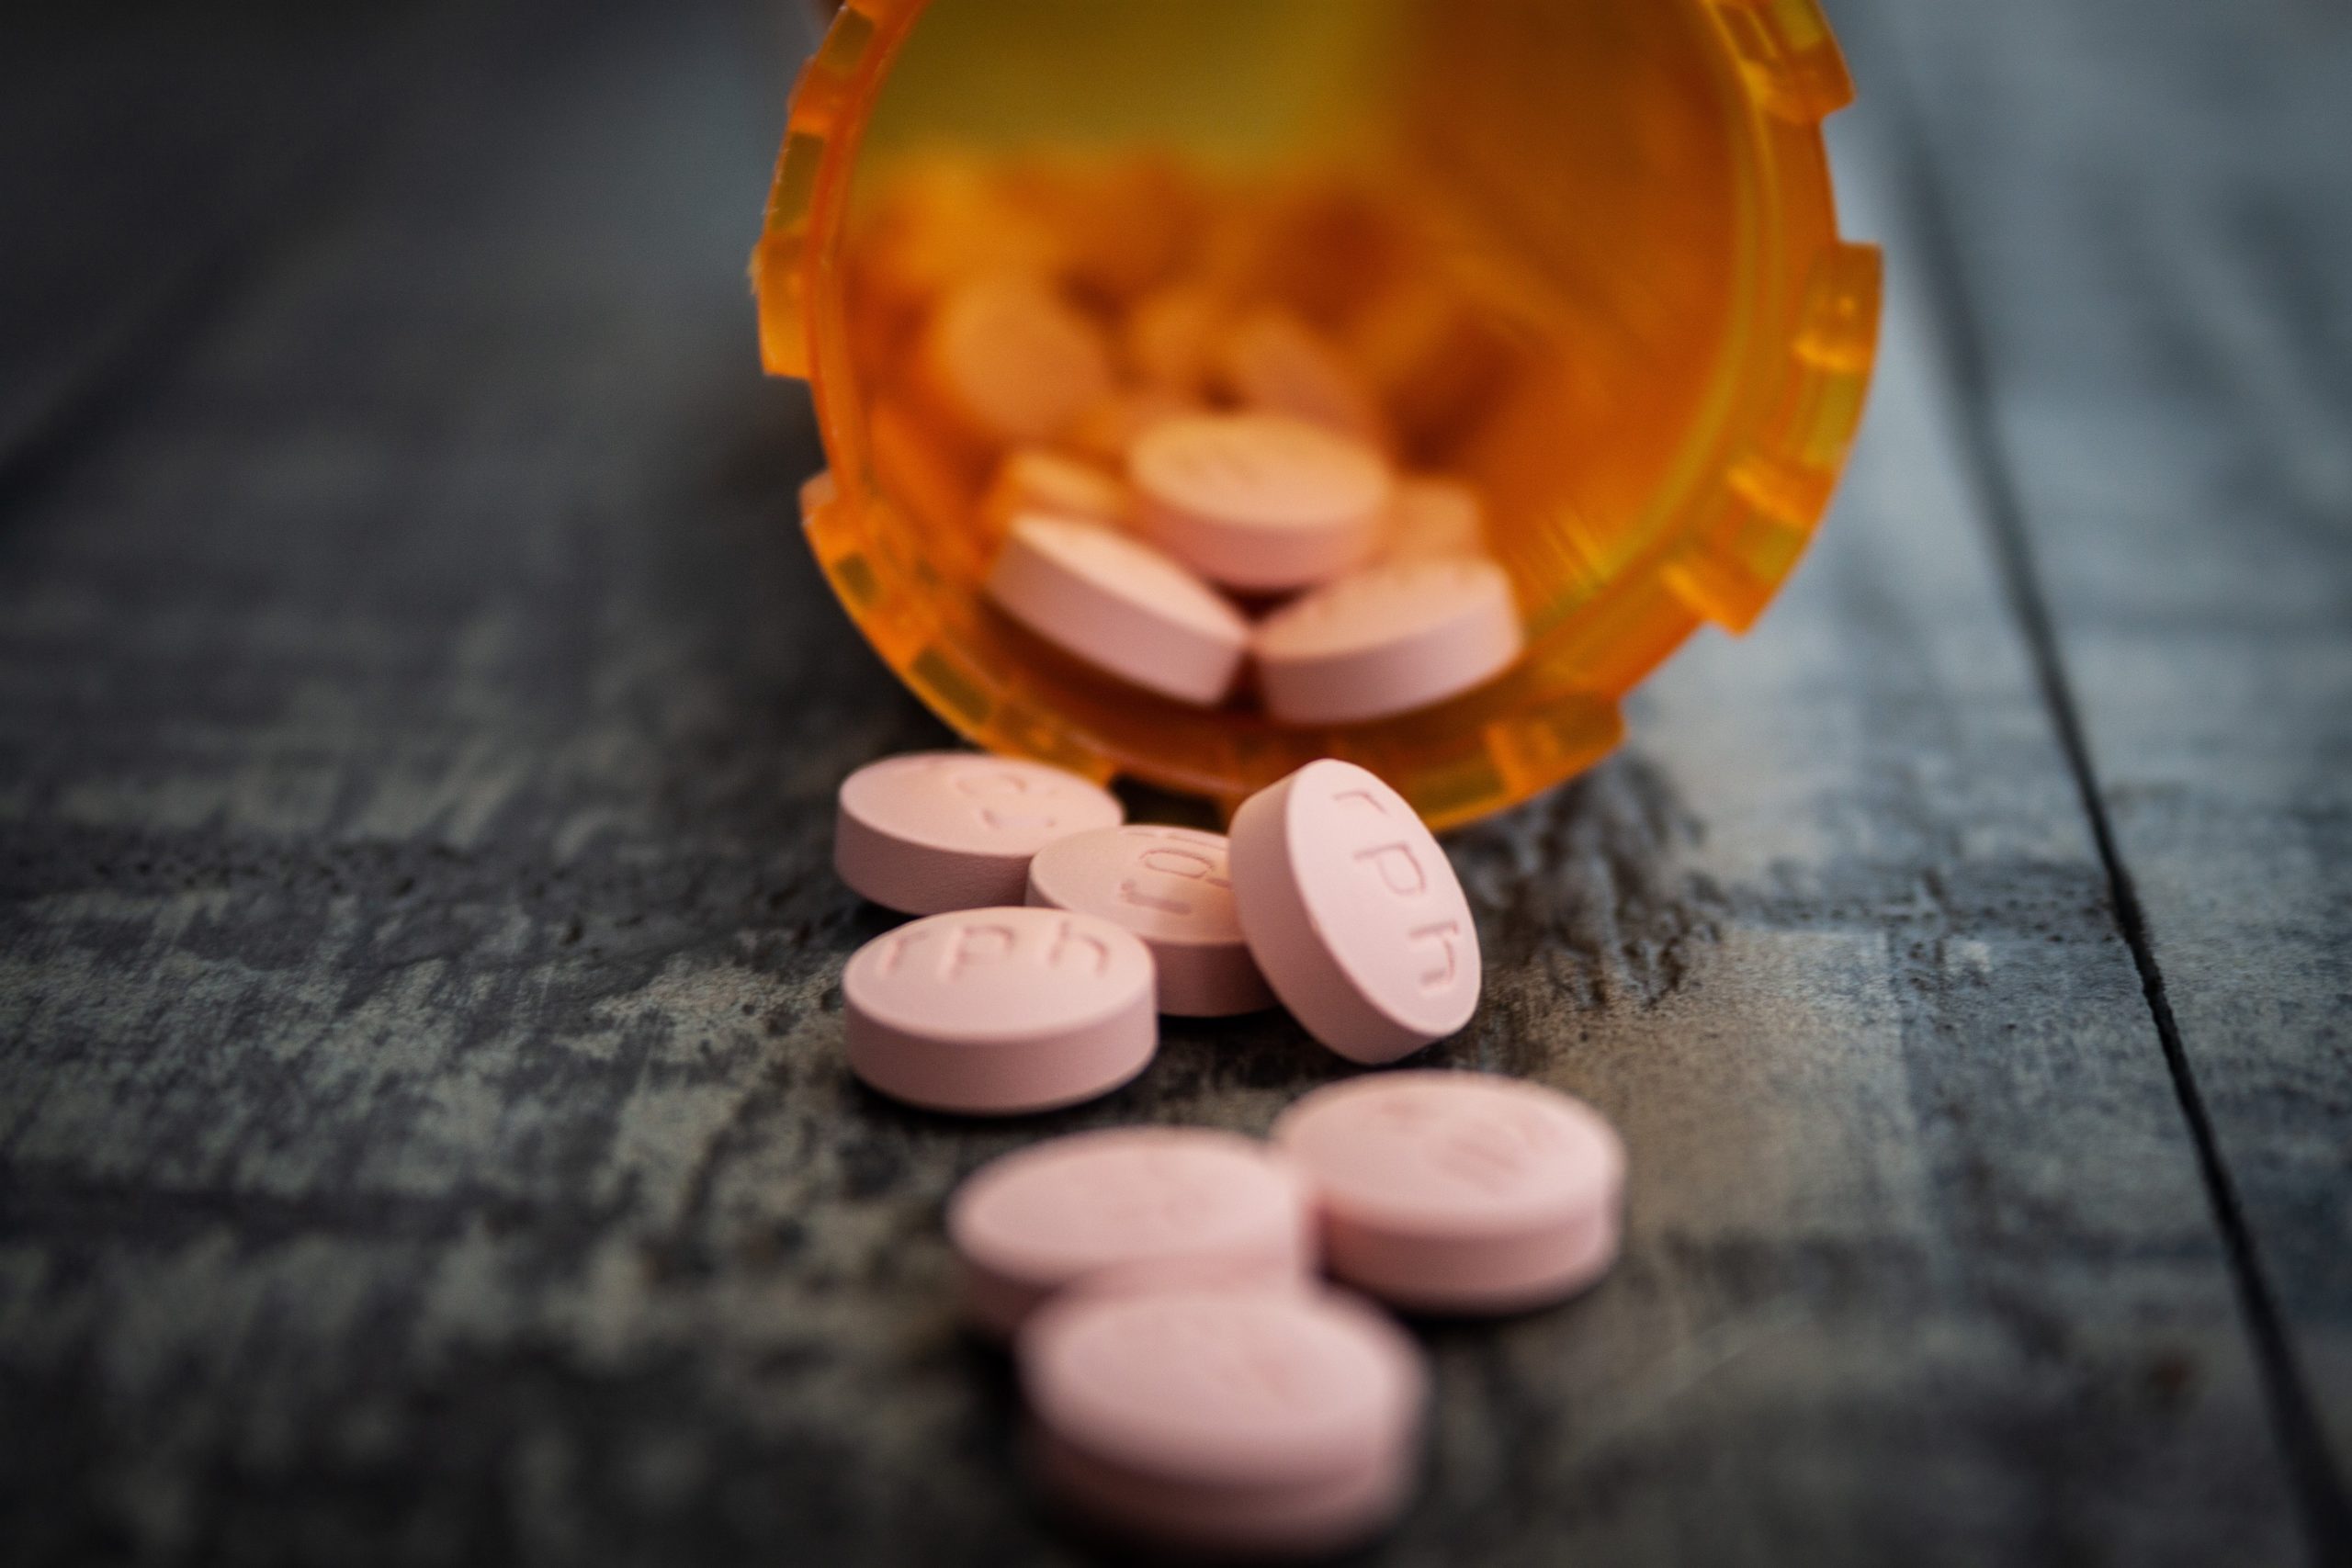 Prescription Stimulant (Speed) Addiction What You Need To Know